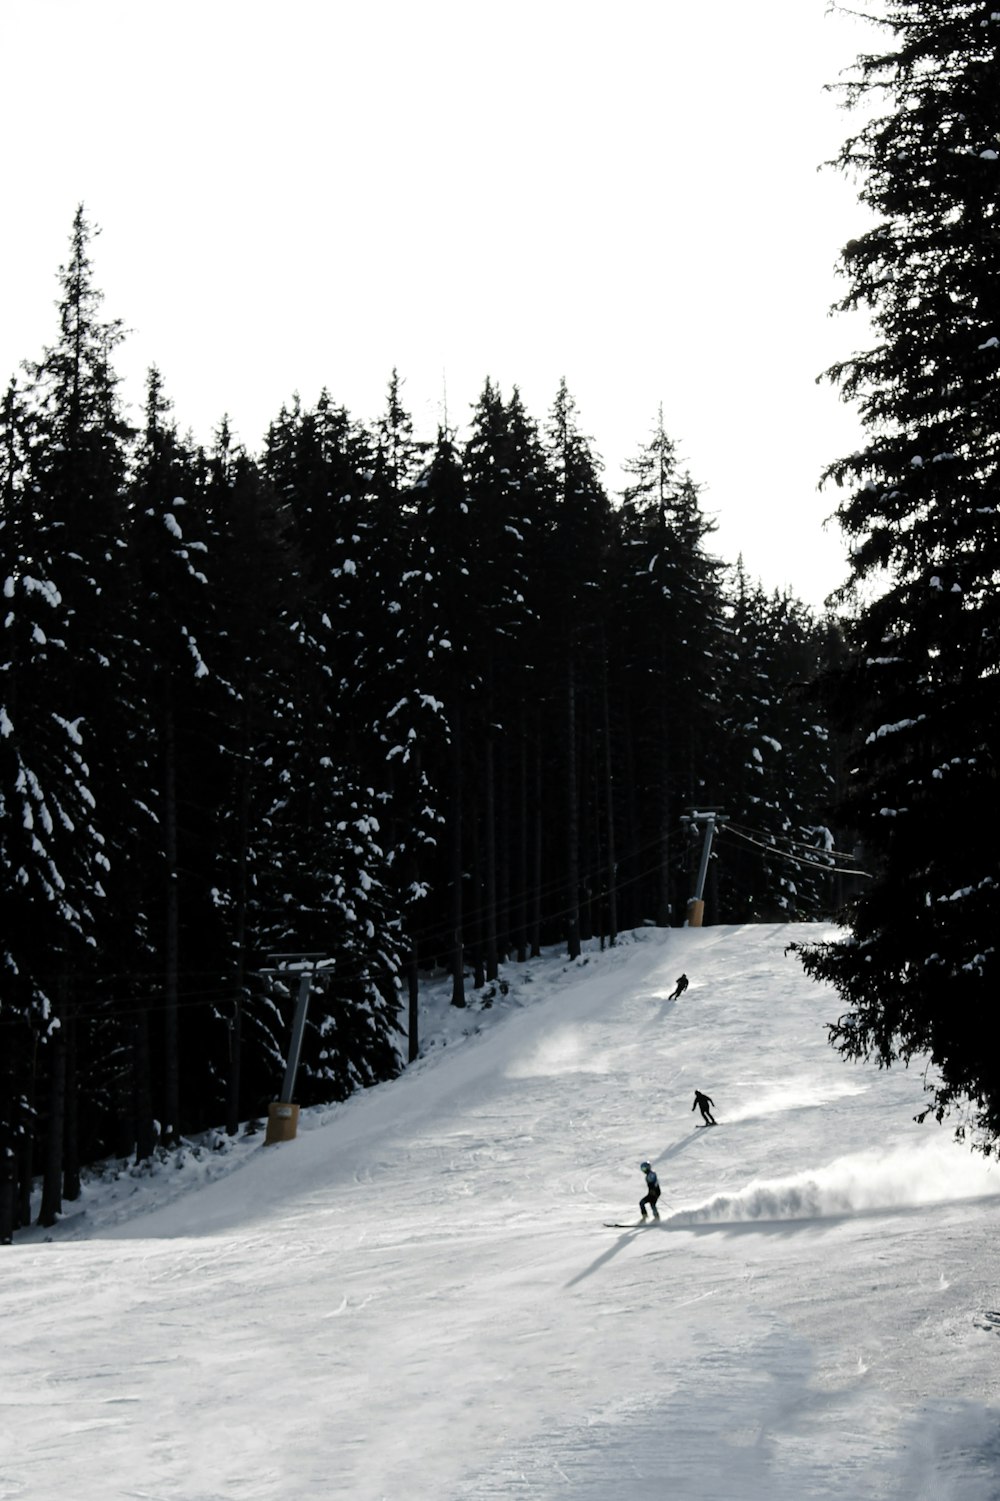 two people skiing down a snow covered slope